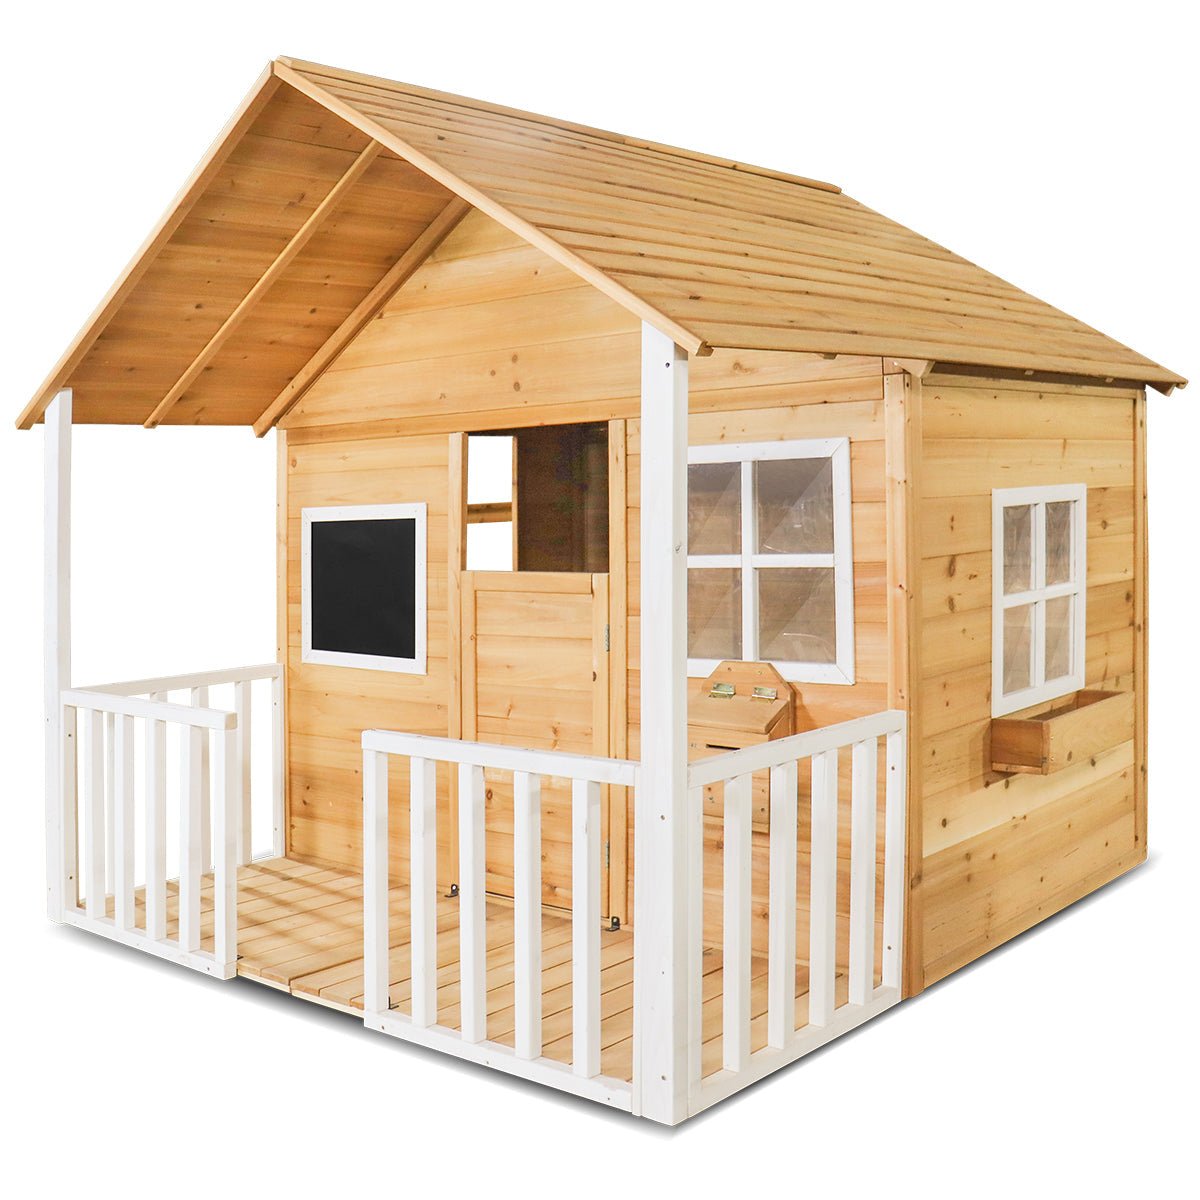 Kids Outdoor Playhouse - Camira Cubby House